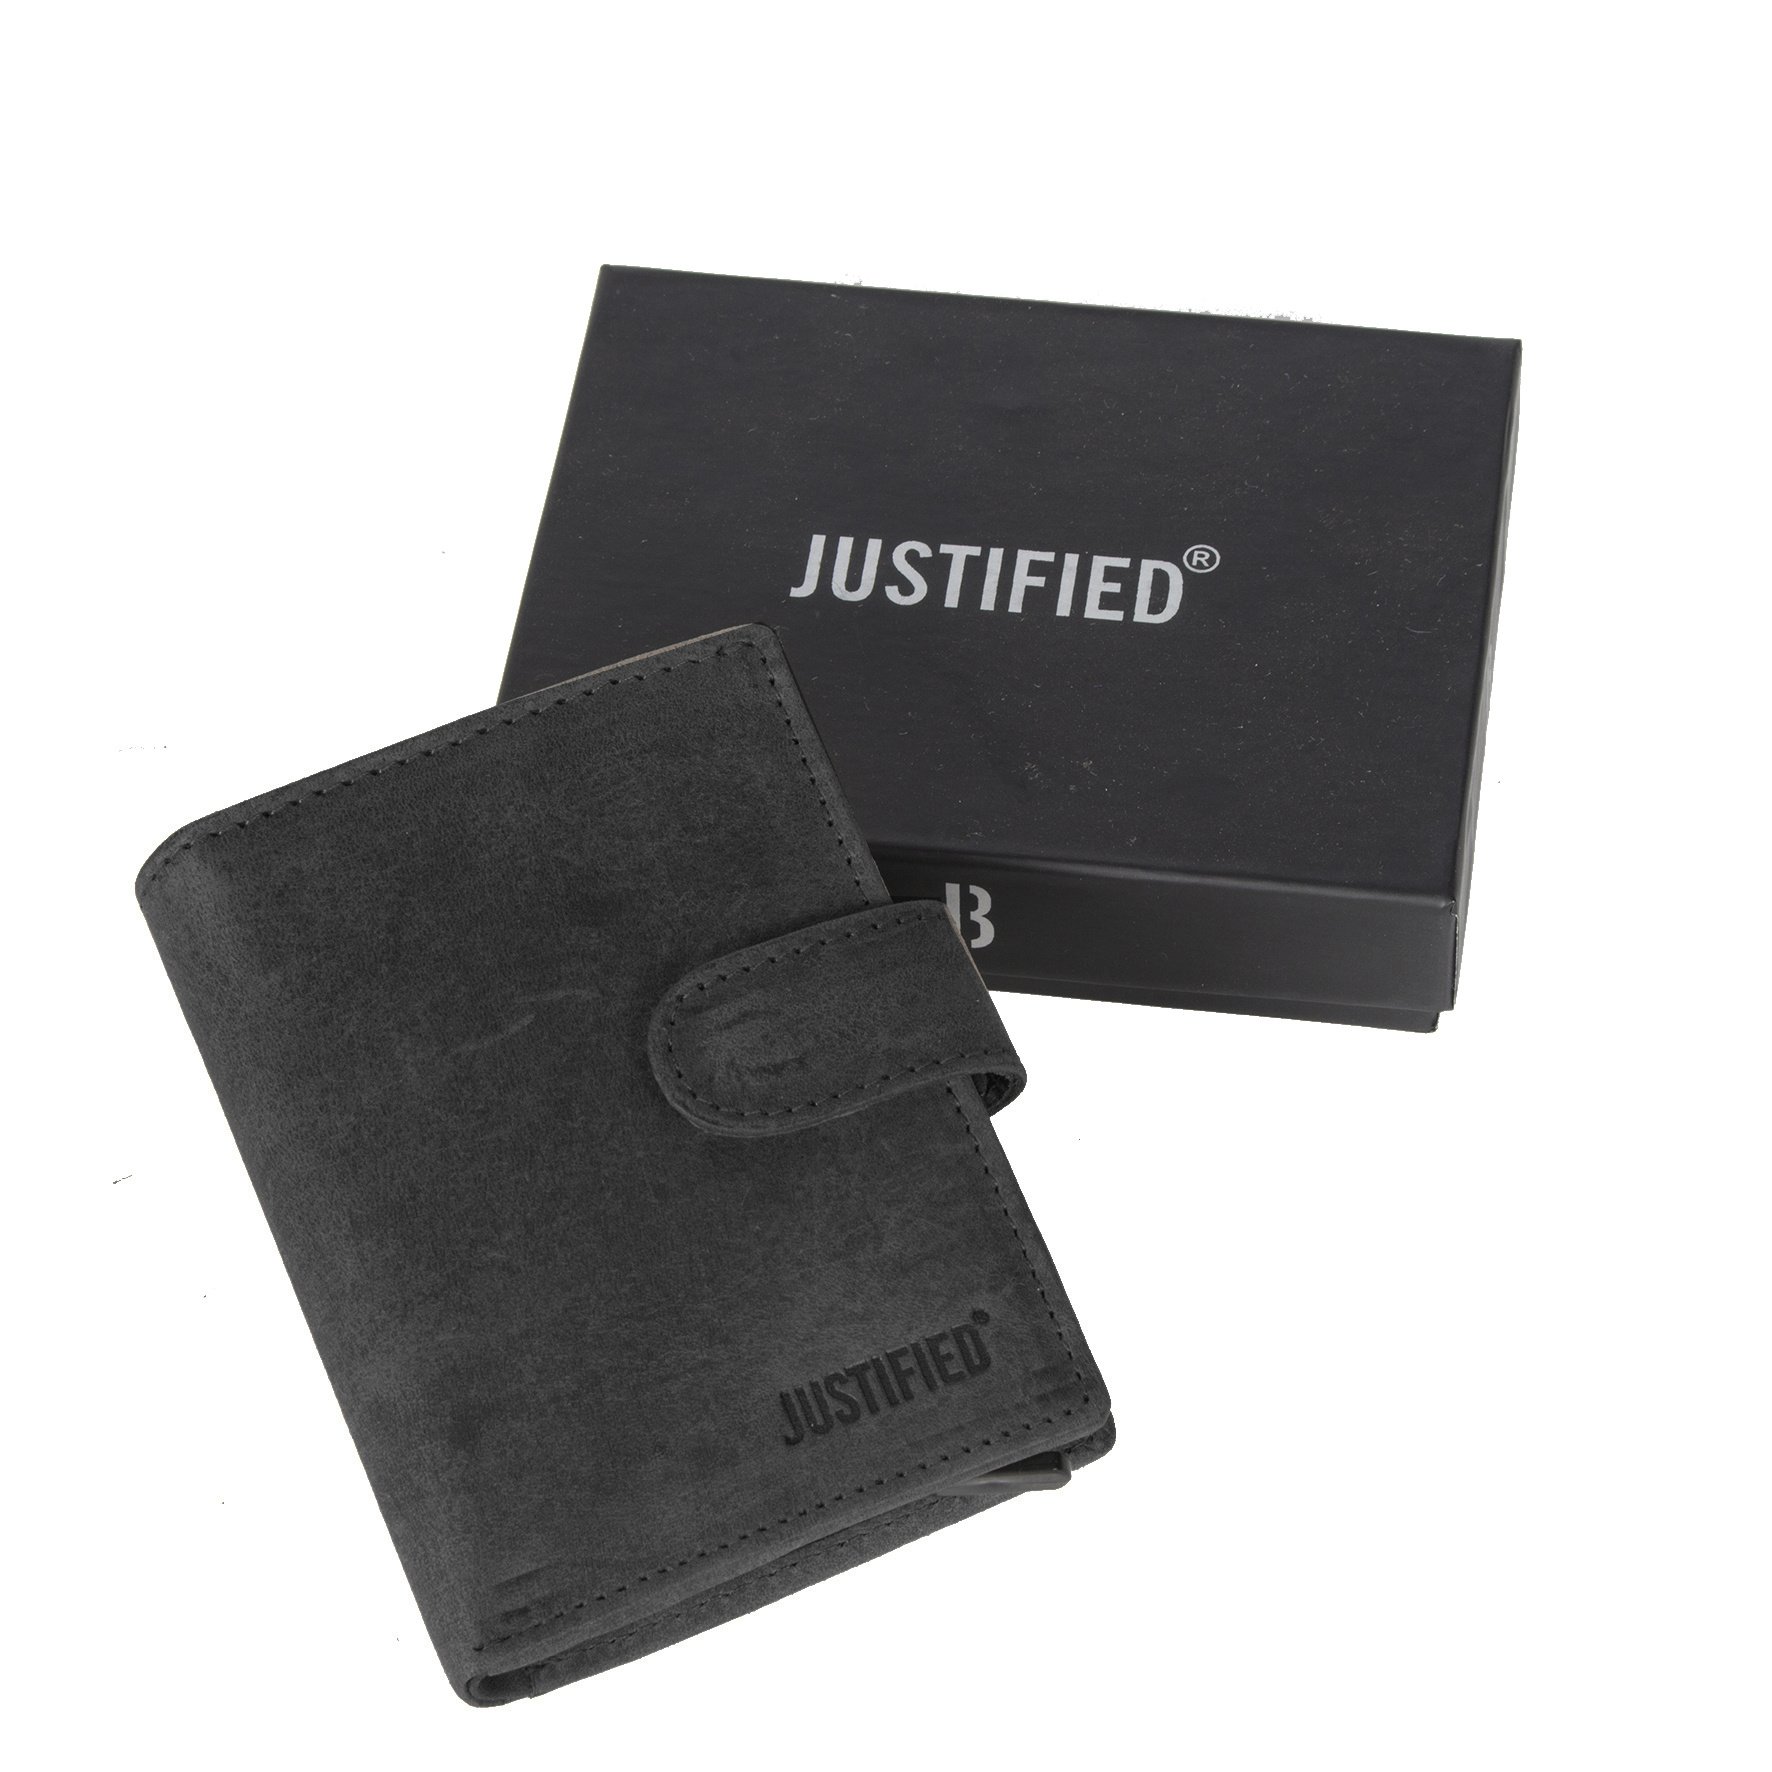 Justified Bags Justified Leather Nappa Credit Case Holder Black + Box